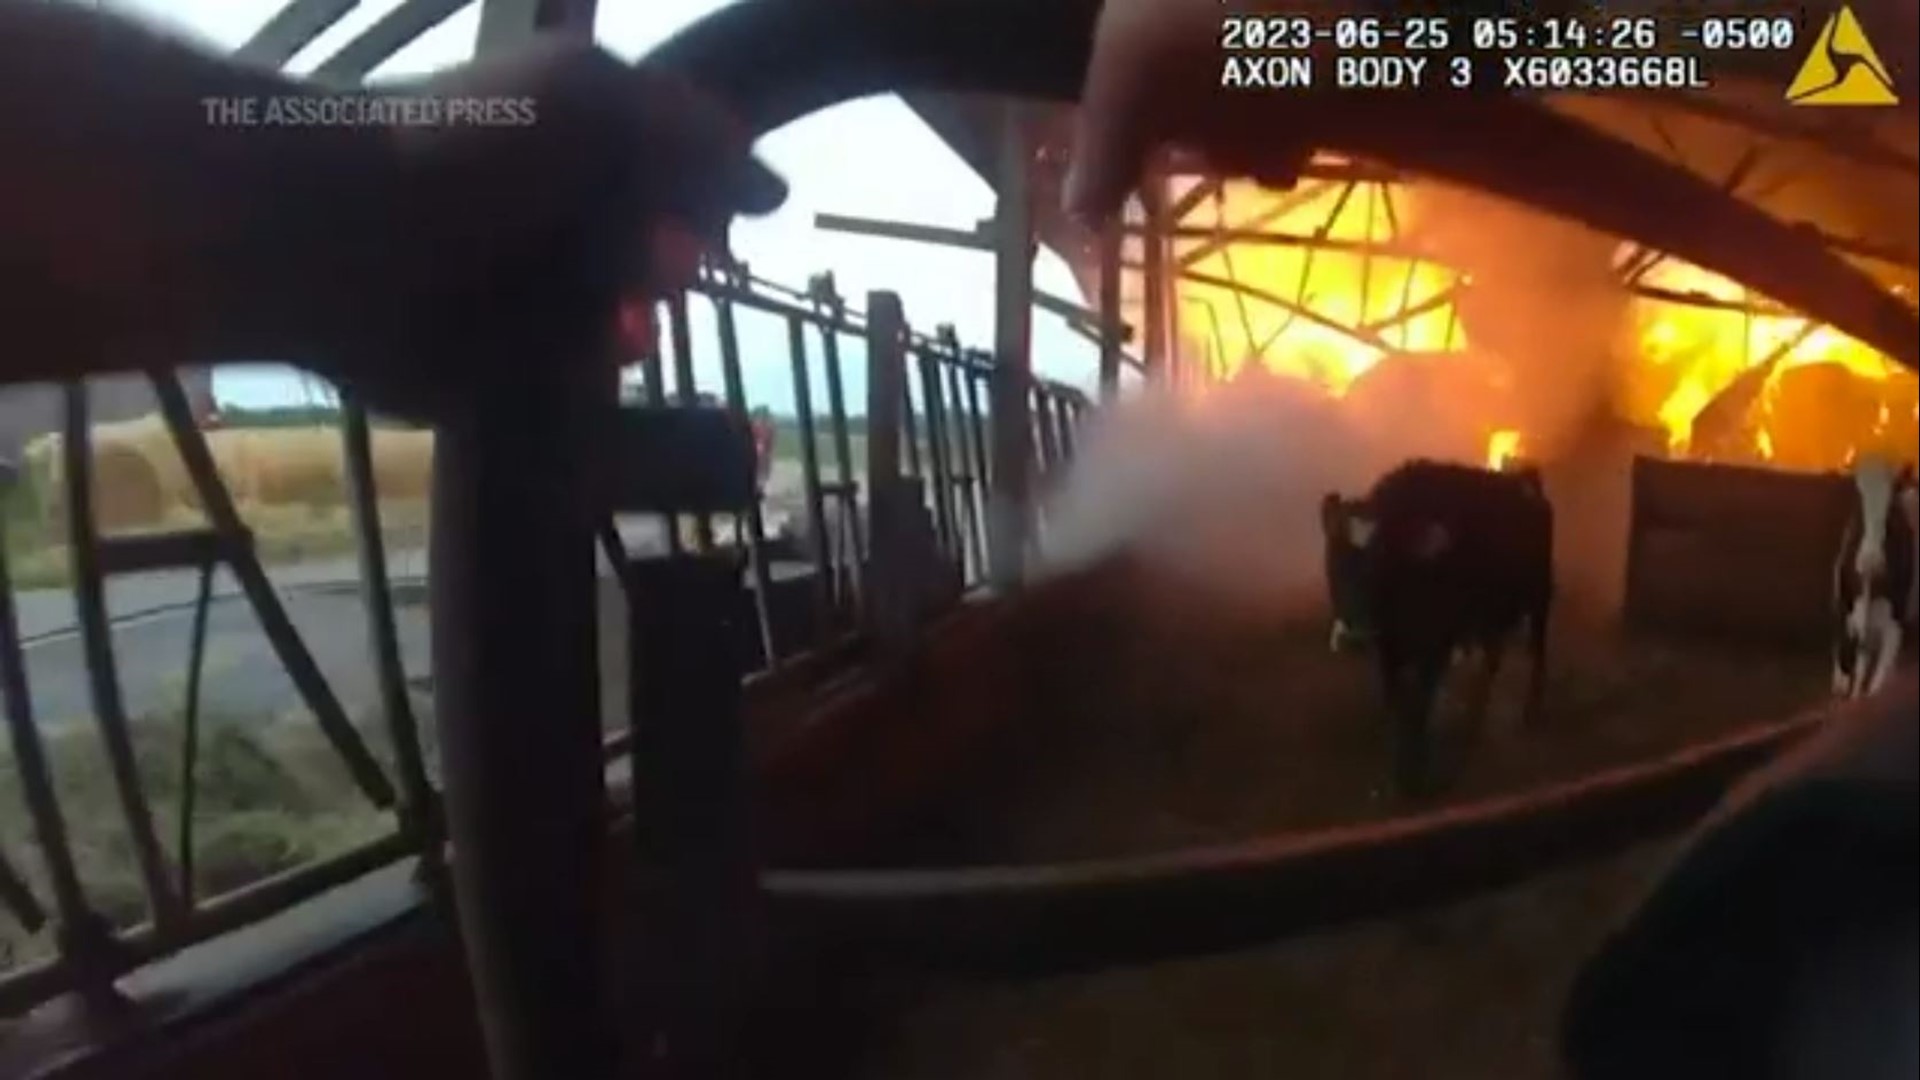 A Wisconsin police officer who ran into a burning barn and rescued three cows trapped inside says the cows “made a beeline” for a pasture once he opened a gate.